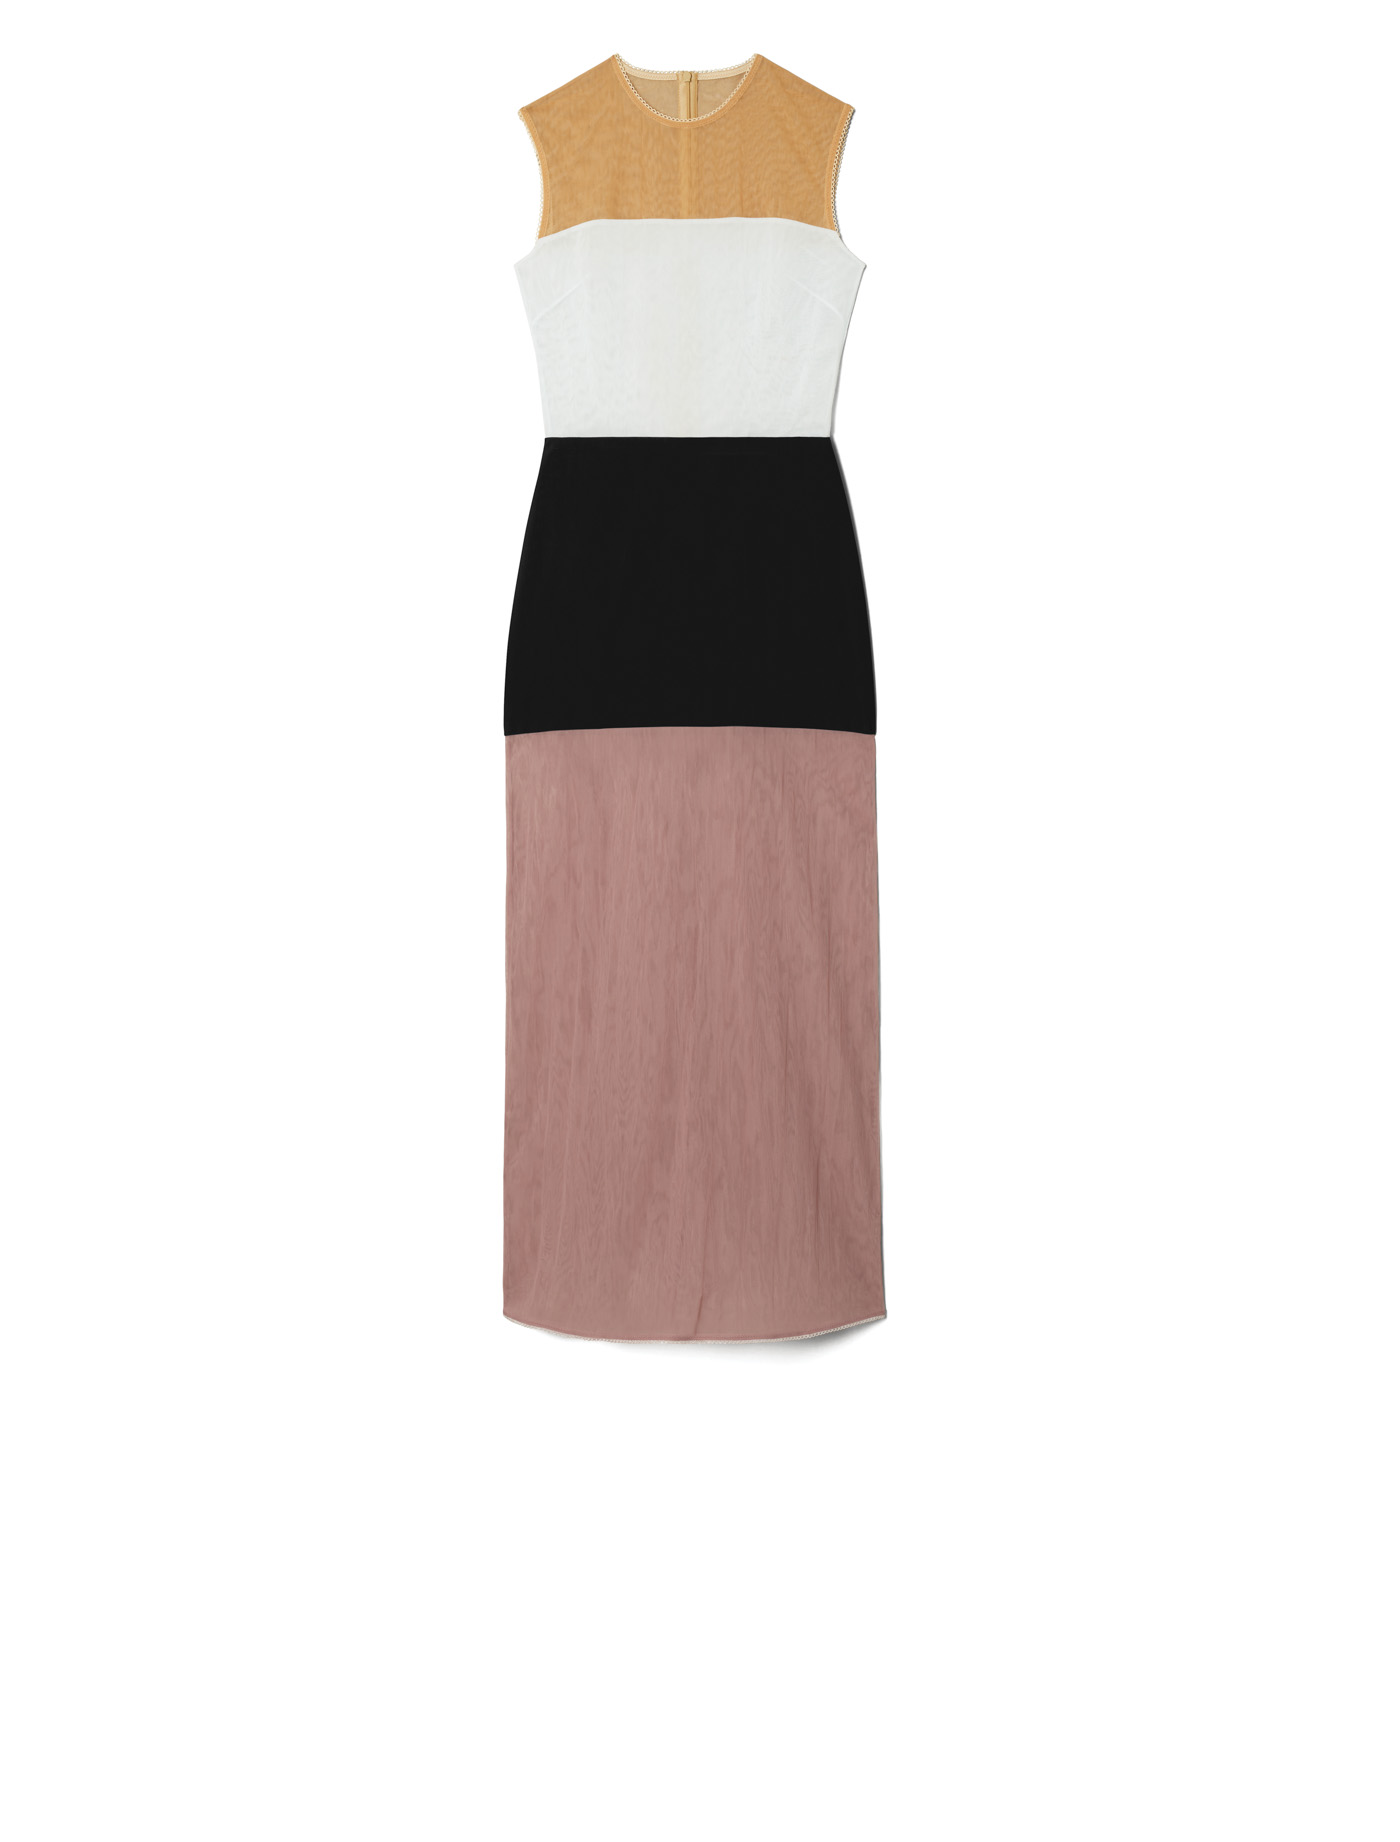 32 Tory Buch, Colorblock Jersey Dress 159214 In Mauve, Toryburch.com